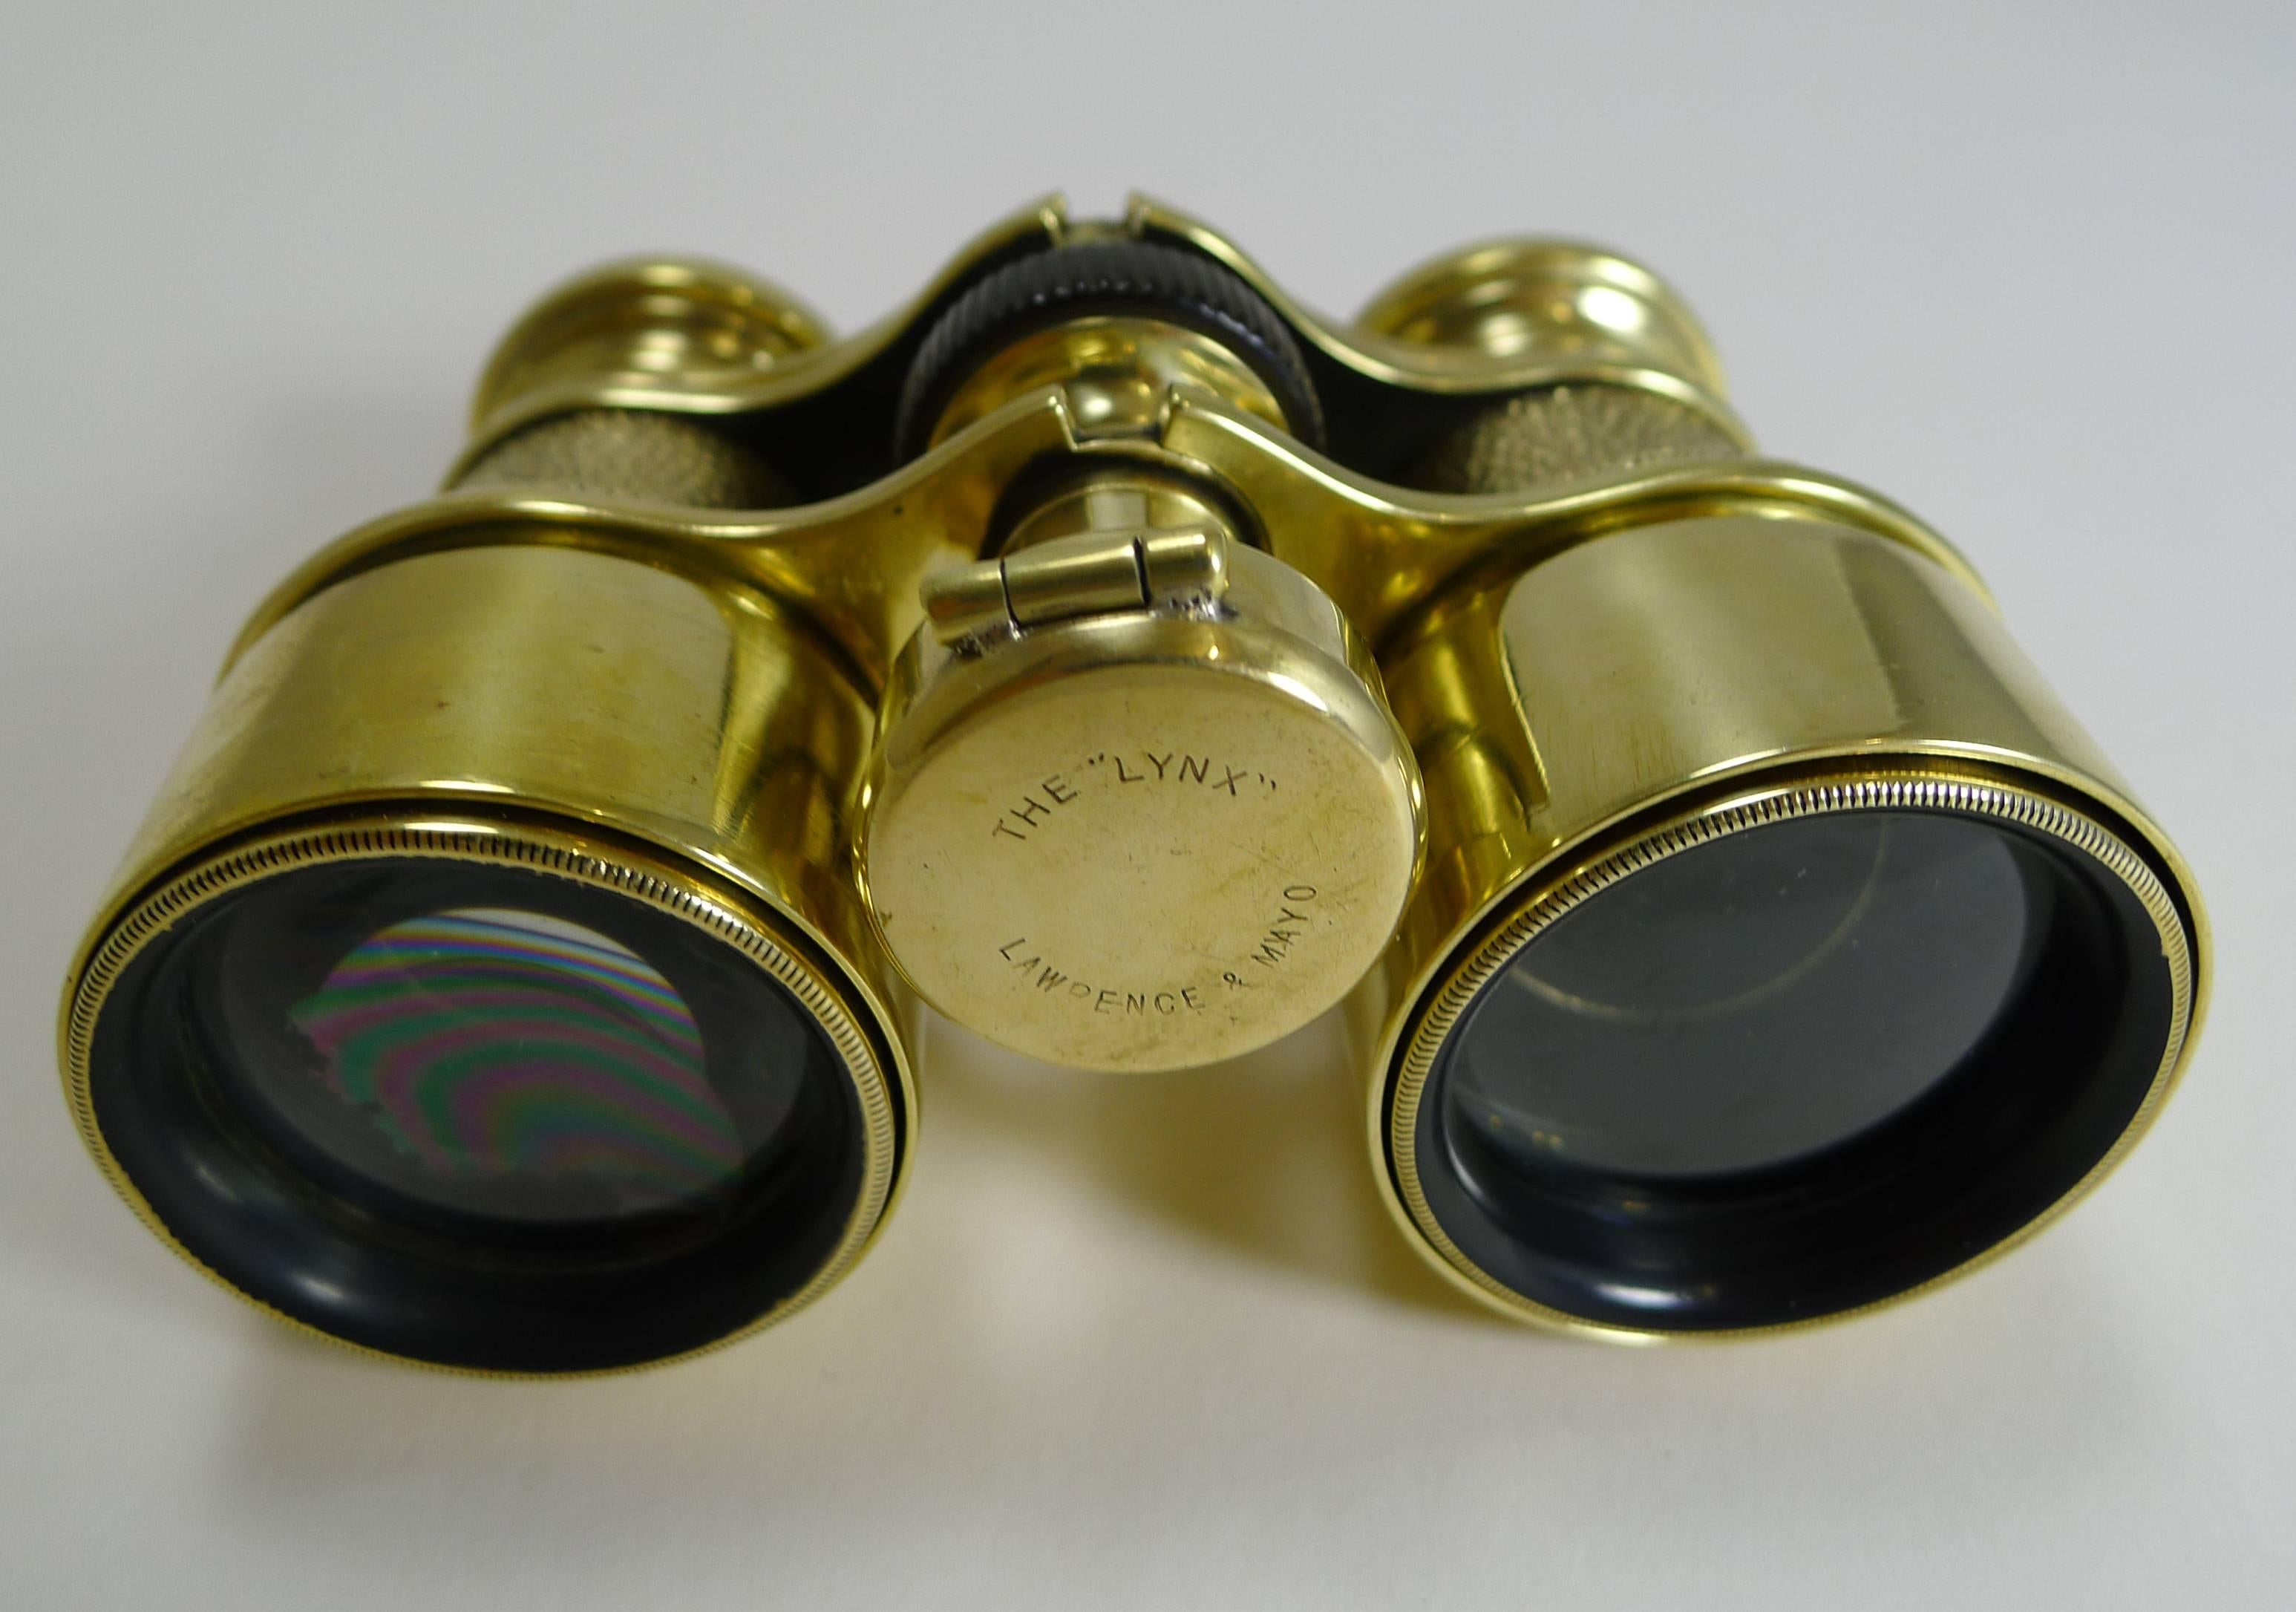 Brass Antique English Field Glasses or Binoculars by Lawrence and Mayo, with Compass